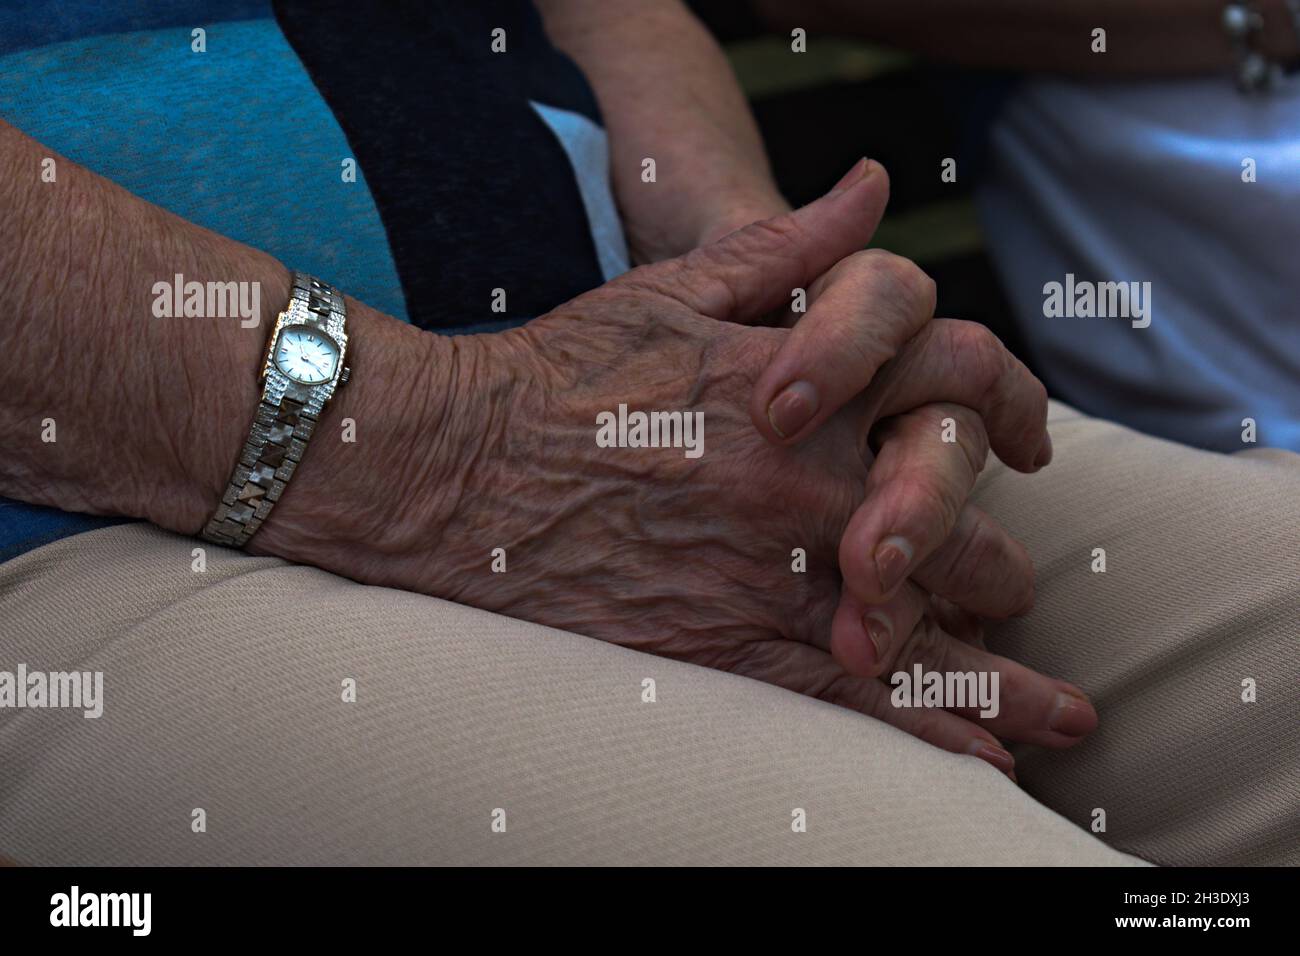 elderly woman hands folded on her knees Stock Photo